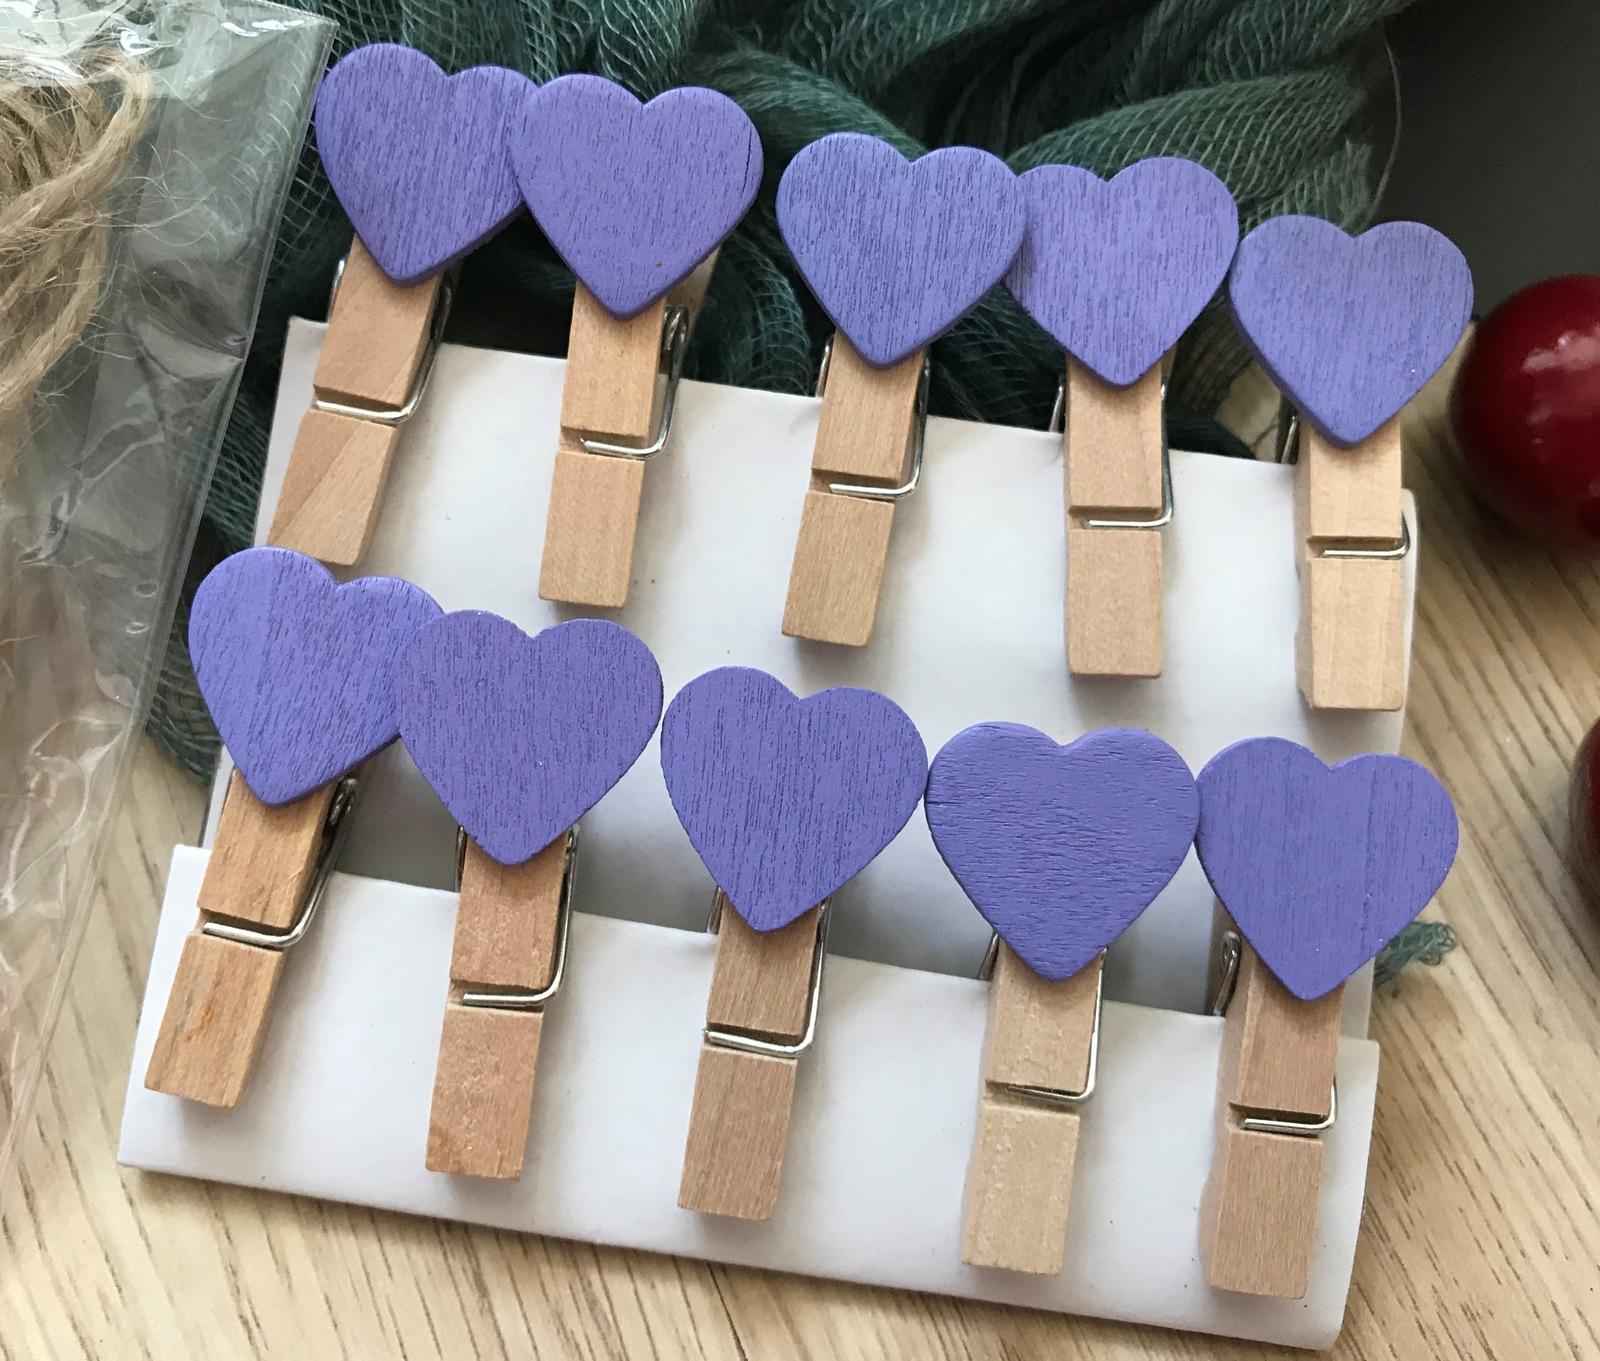 Heart Purple Clothespin,30pcs Wooden Paper Clips,Gifts Wedding Favor Decorations